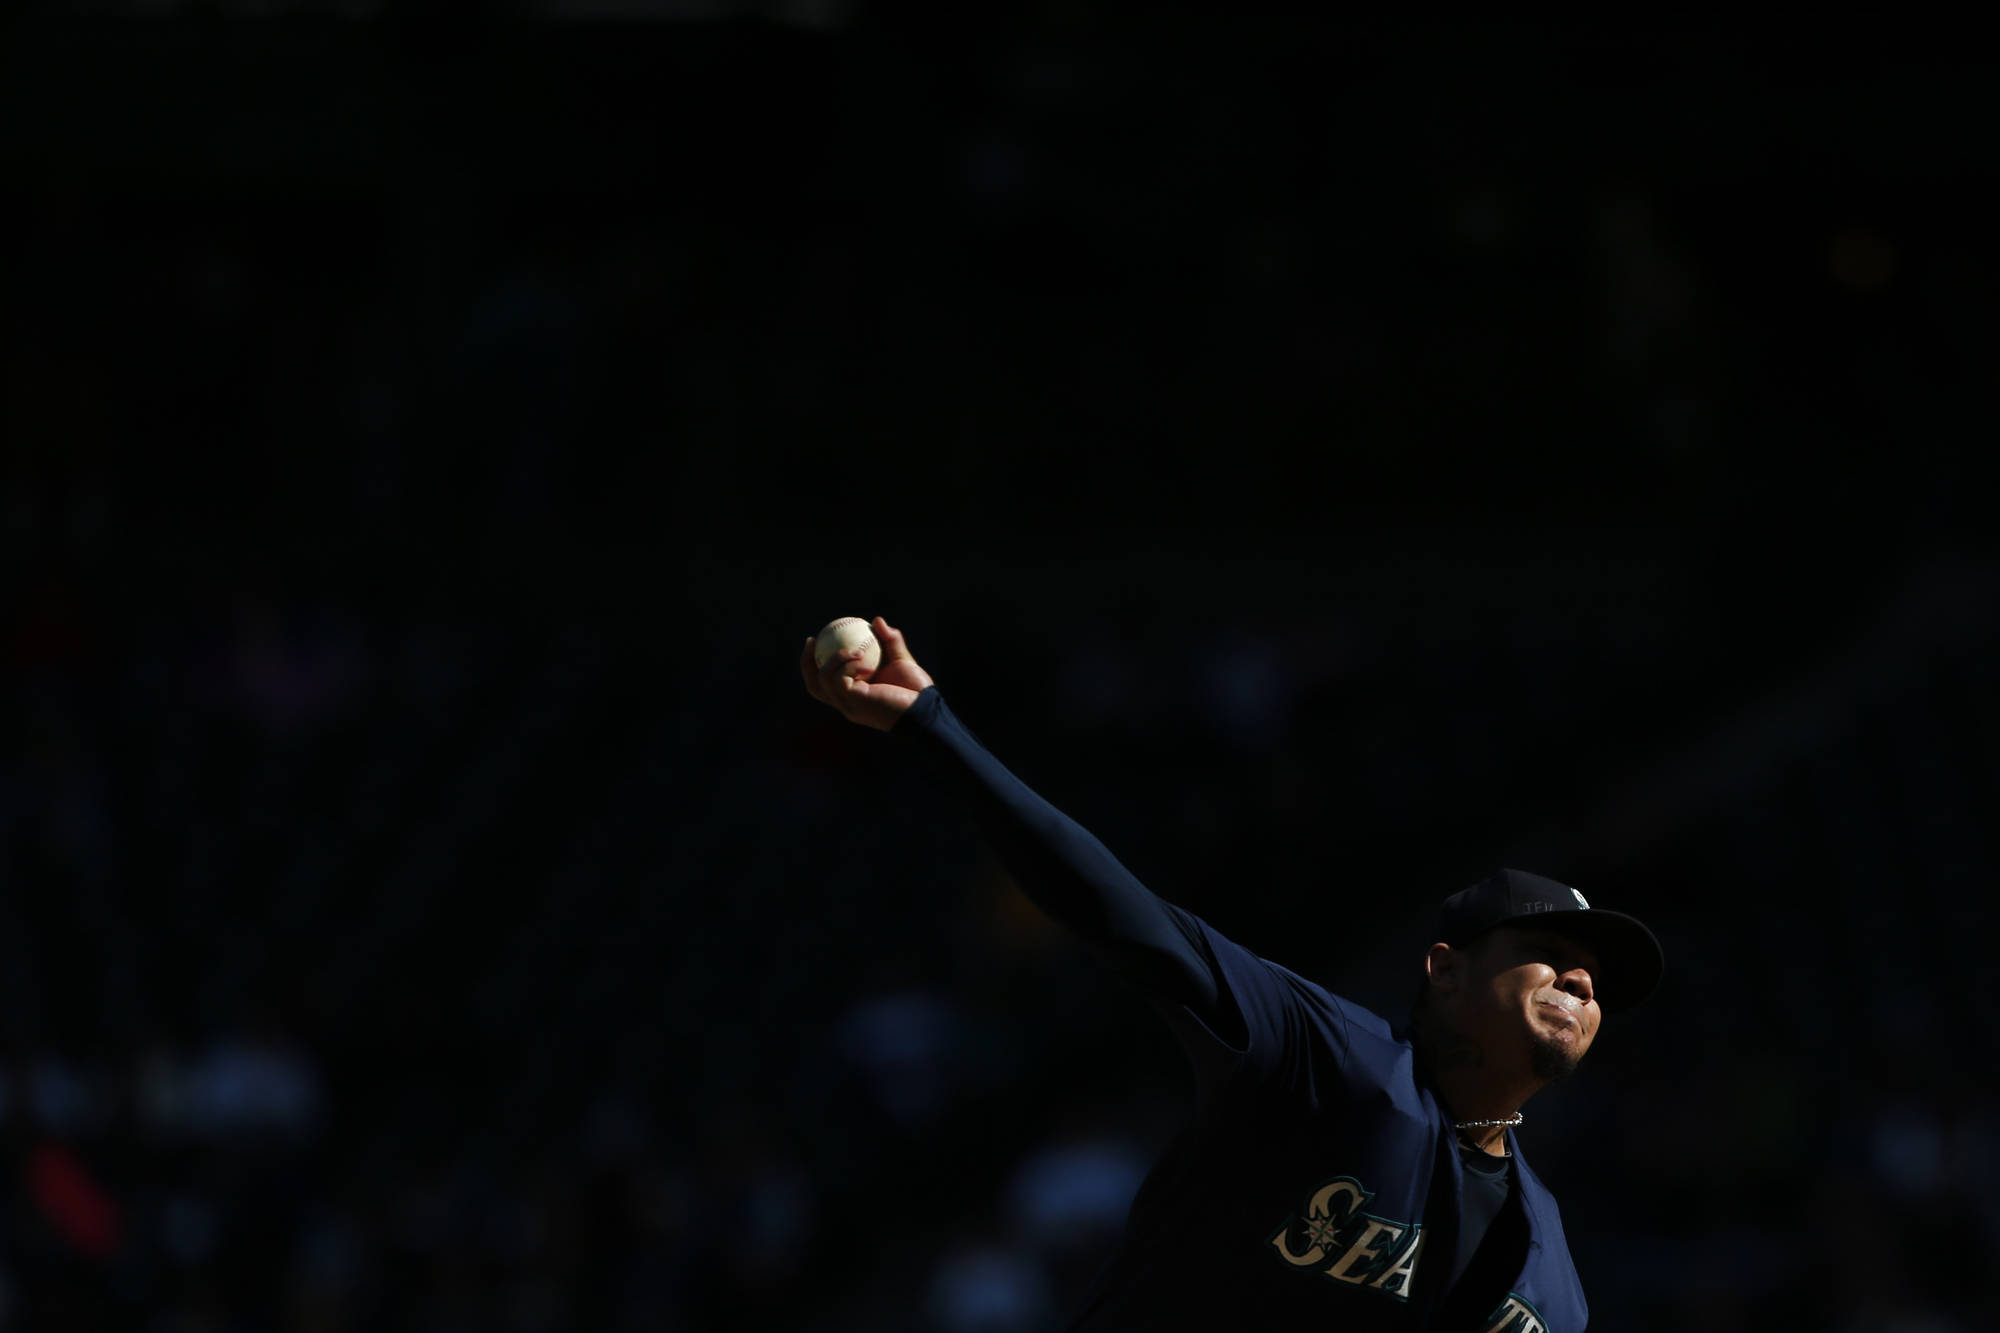 Oakland jumps on Felix, Mariners early in final game of 2016